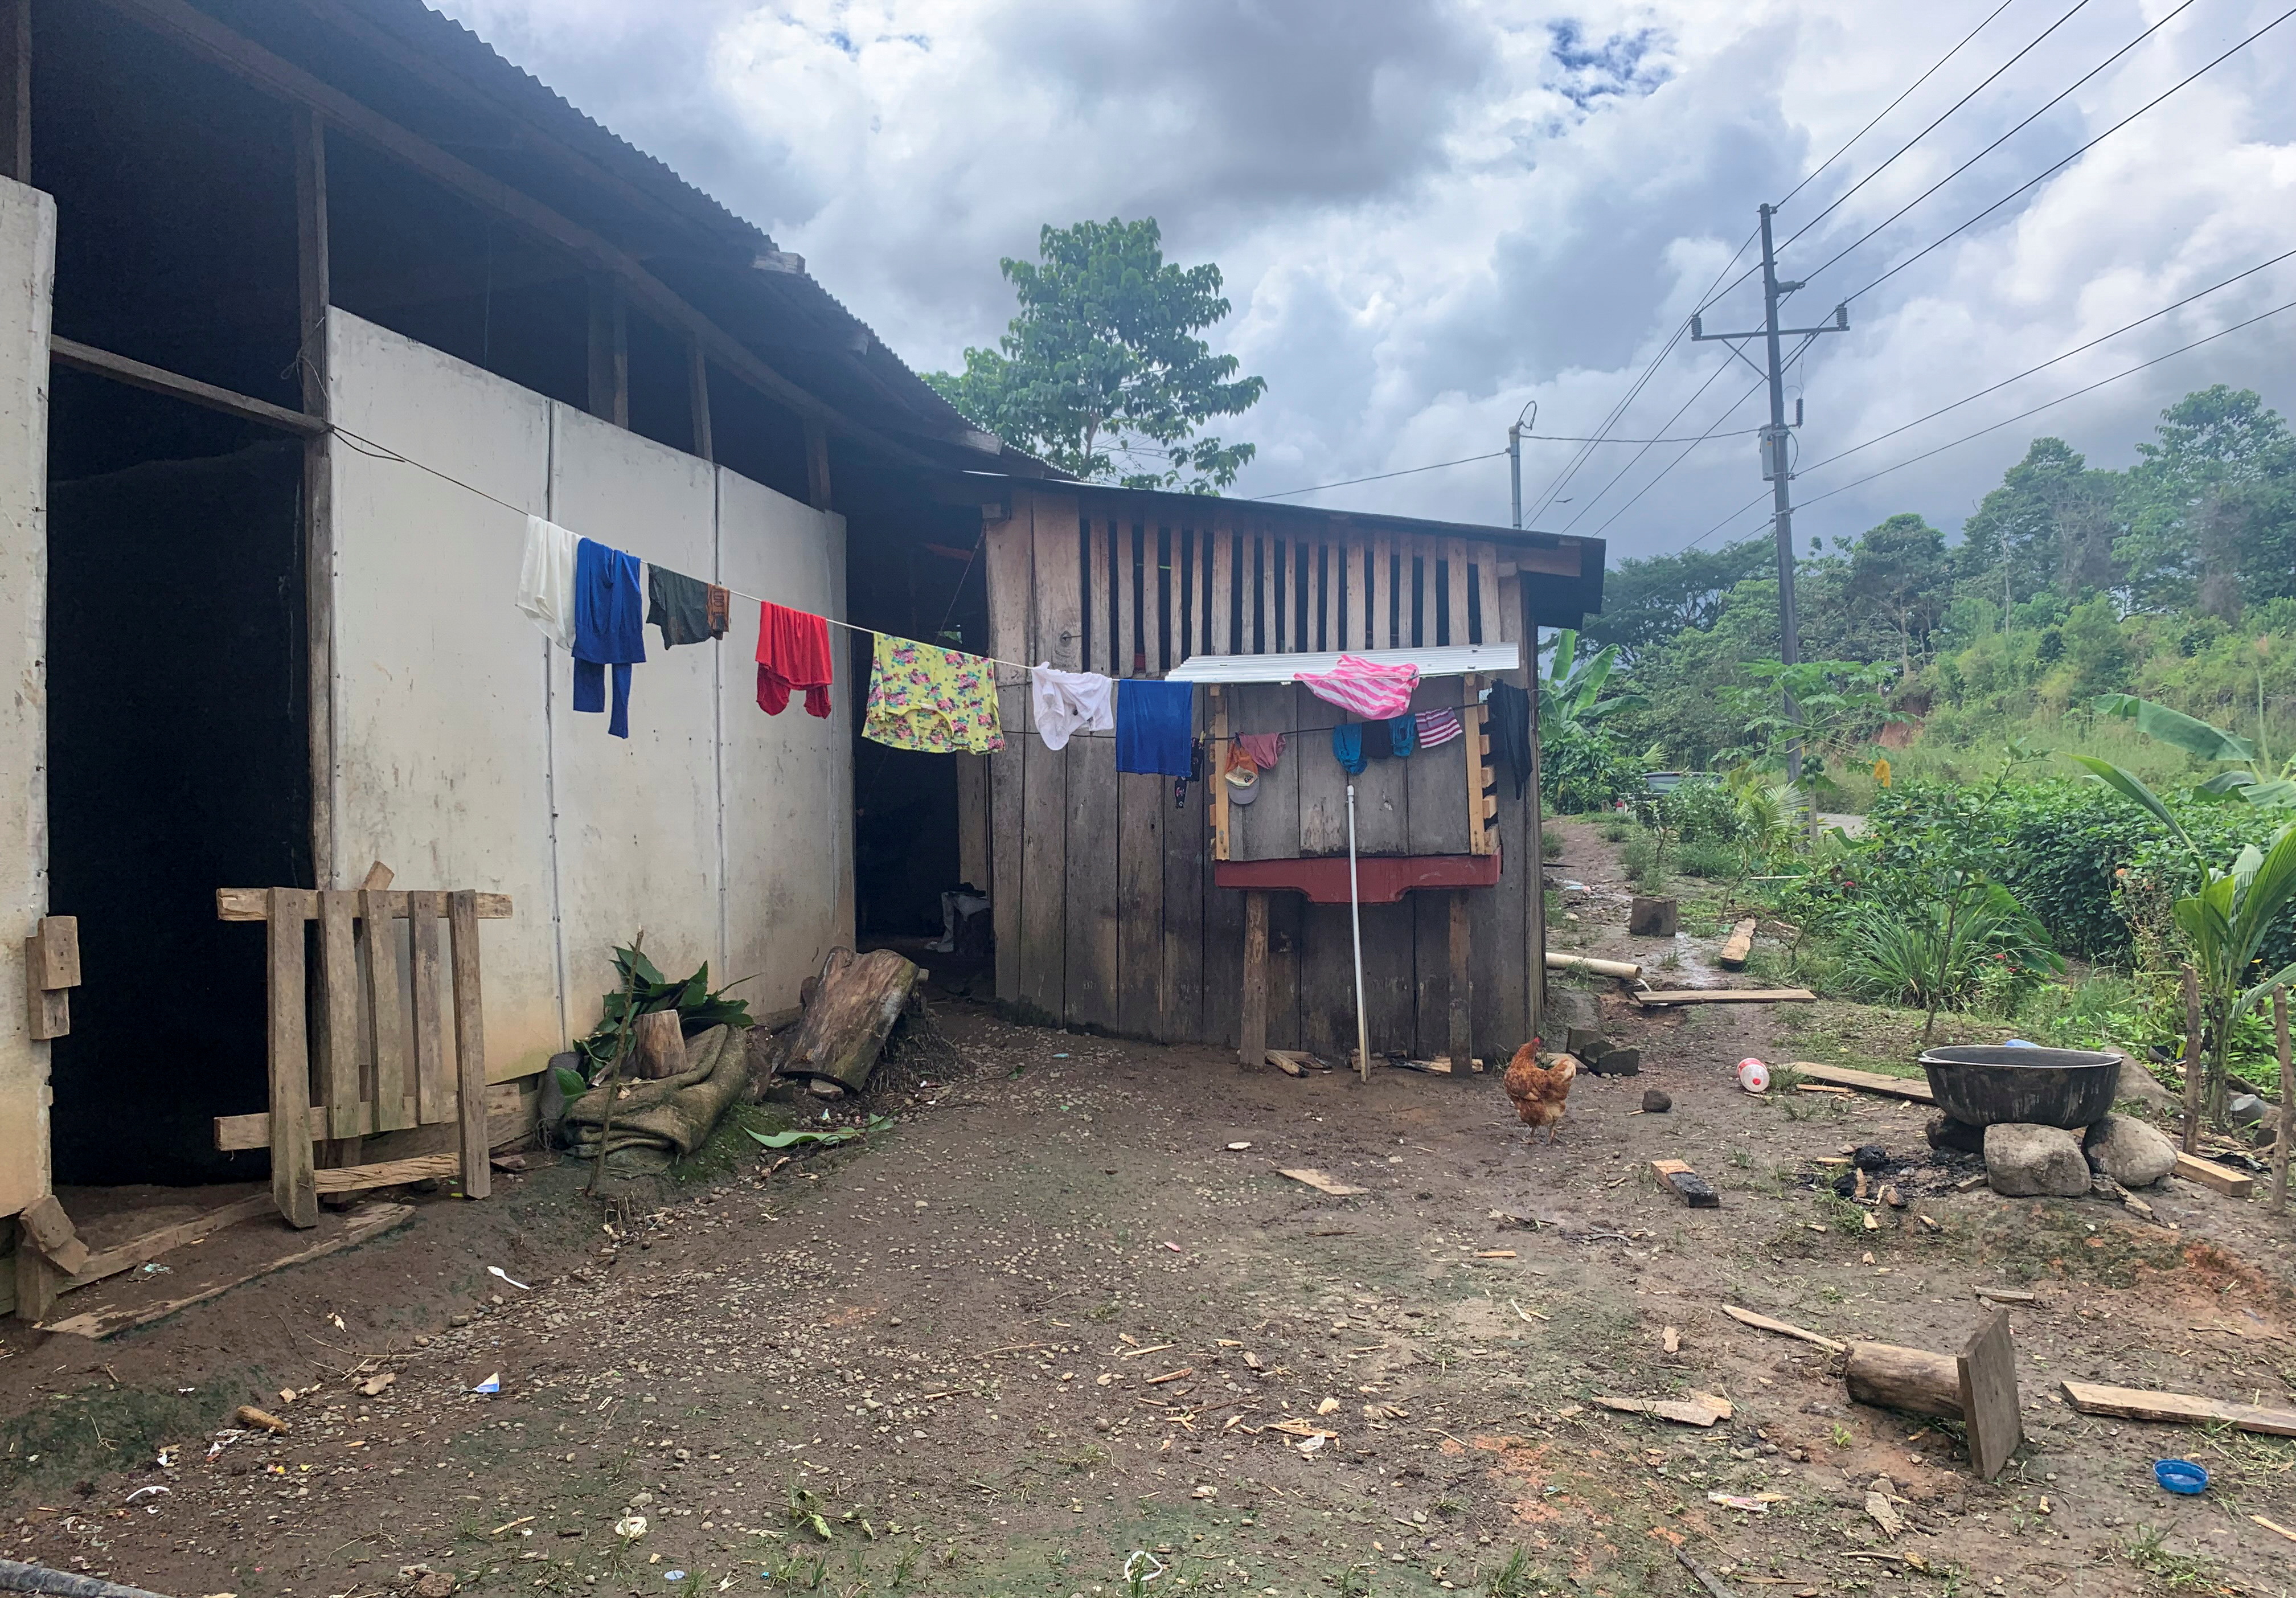 Clothing hang on to dry is seen outside a wooden shack at a neighborhood where Nicaraguan exiles live, in Upala, Costa Rica November 6, 2021. Picture taken November 6, 2021. REUTERS/Daina Solomon